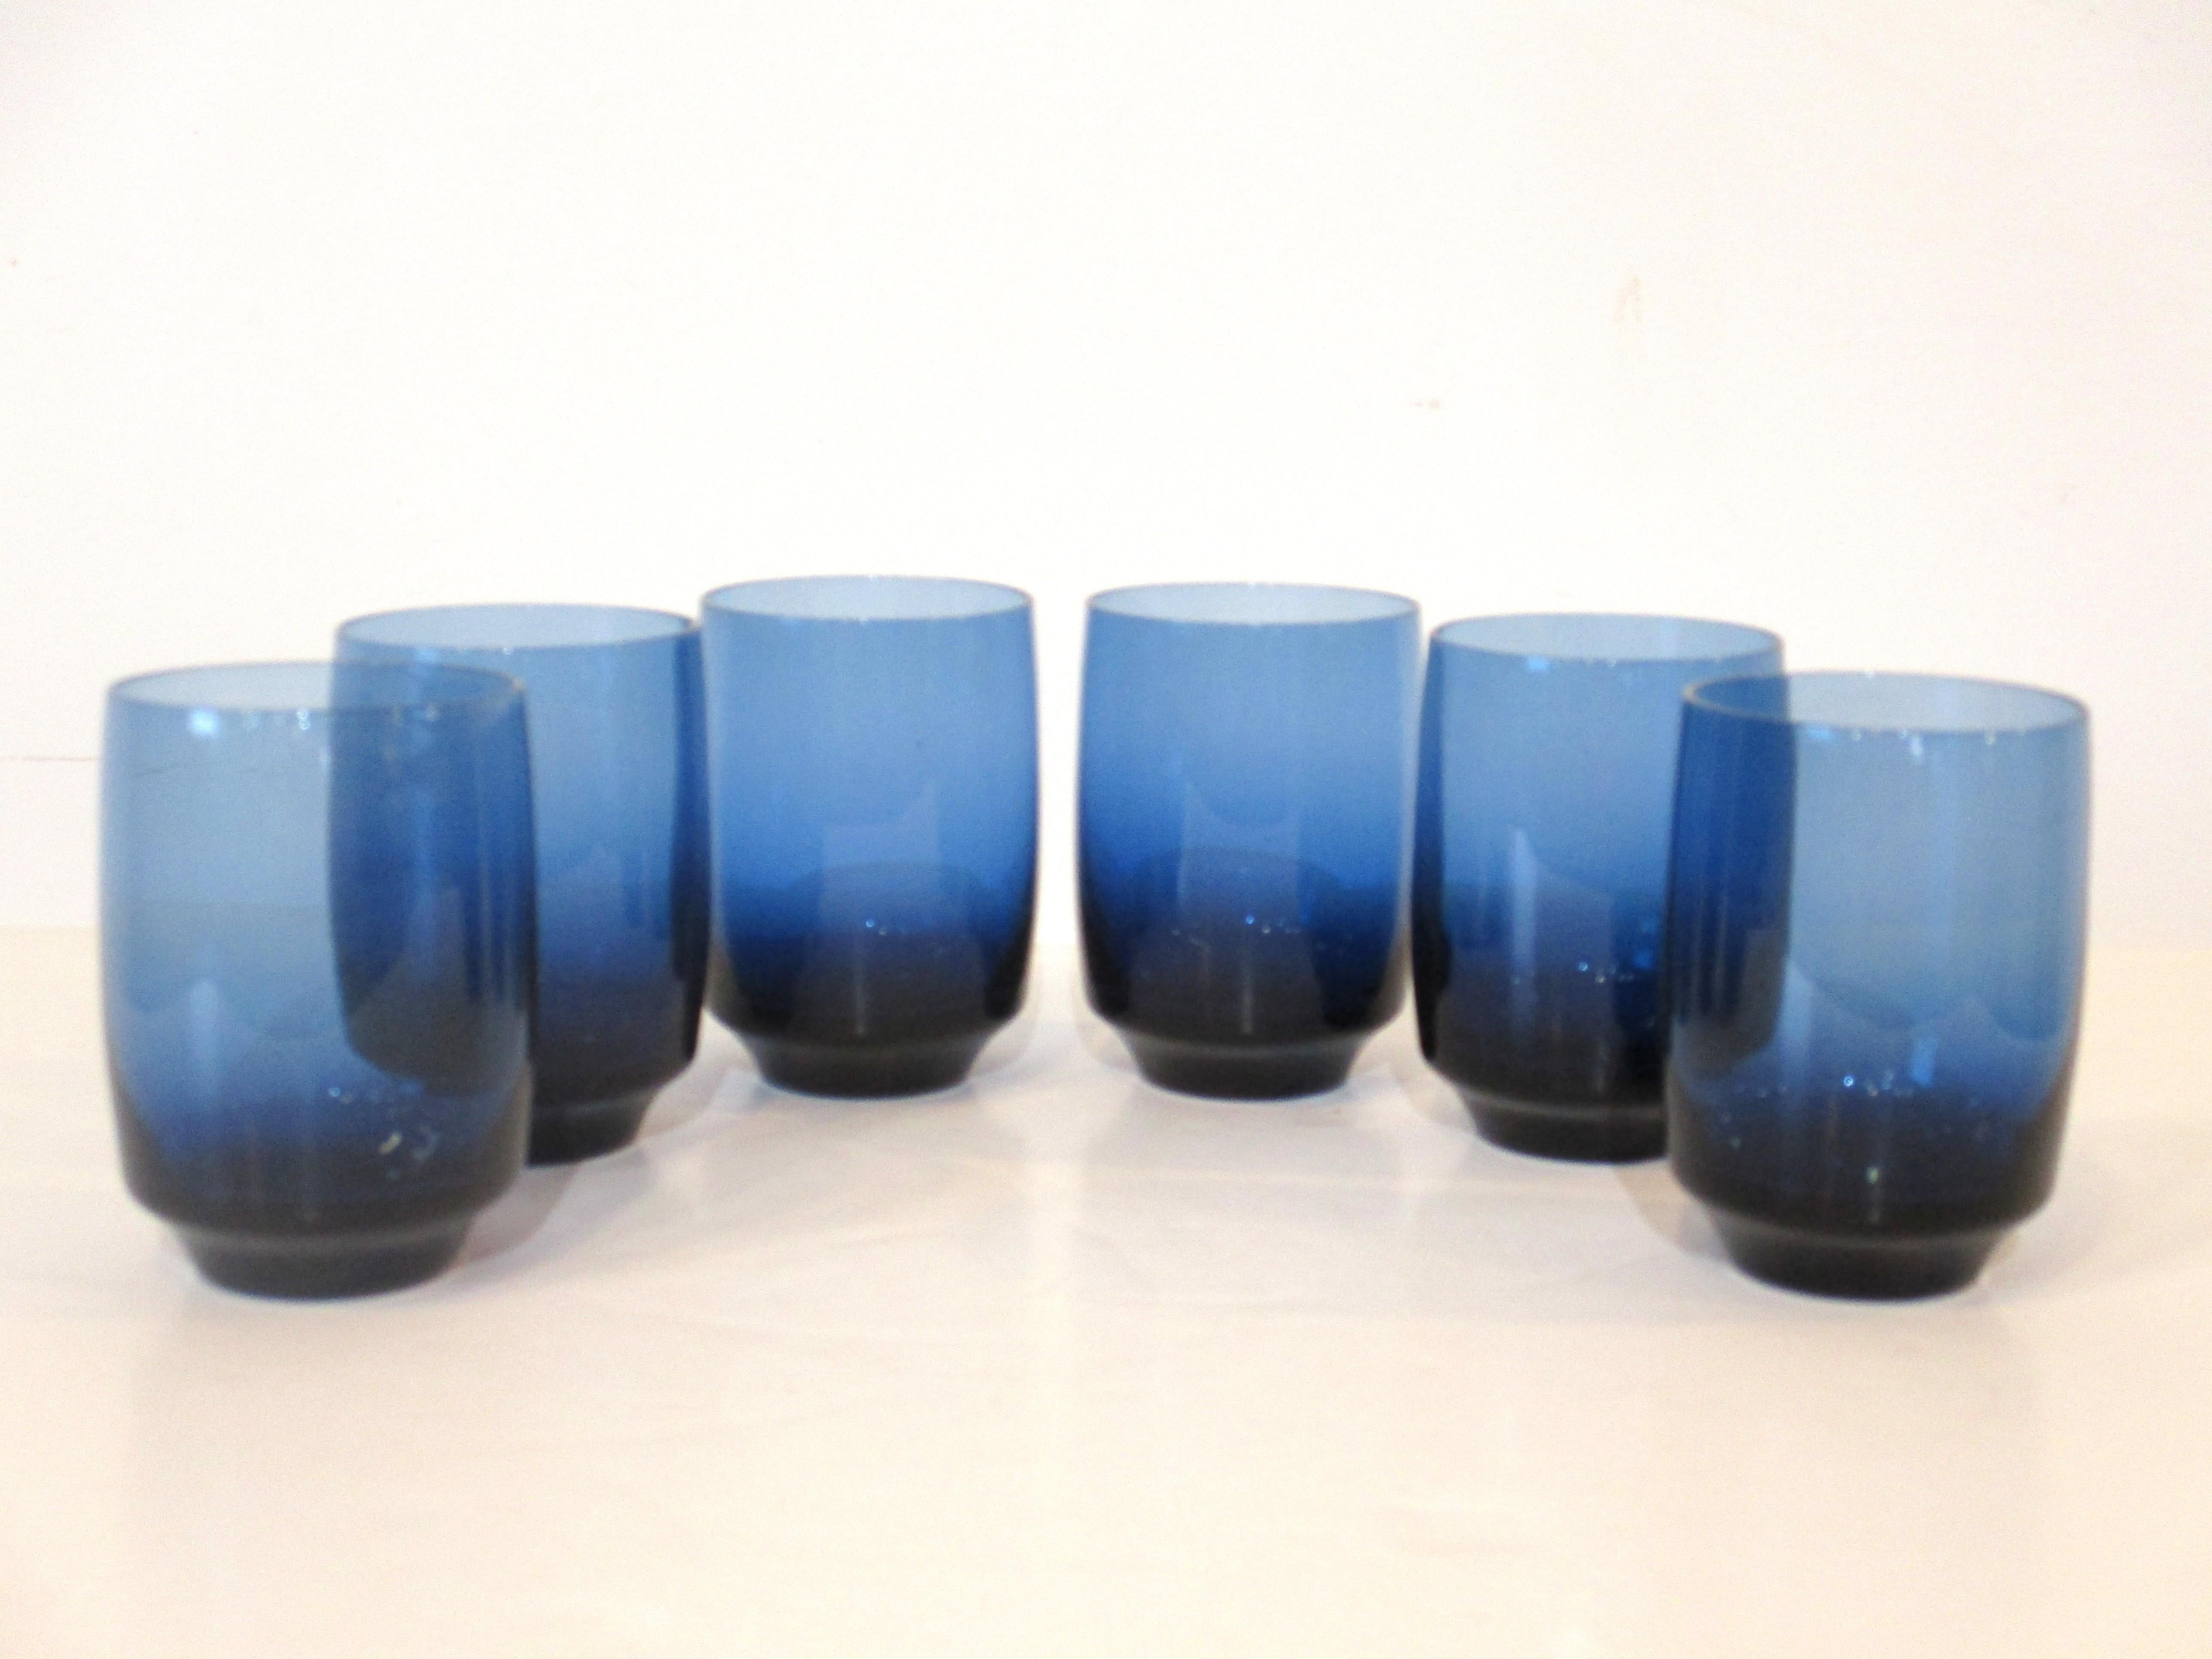 A set of six beautifully and ergonomically crafted low sized tumblers in Vista Ice Blue this color is really reminiscent of Scandinavia. Well balanced and nice feeling in your hands these are NOS ( new old stock ) still in the original packing and